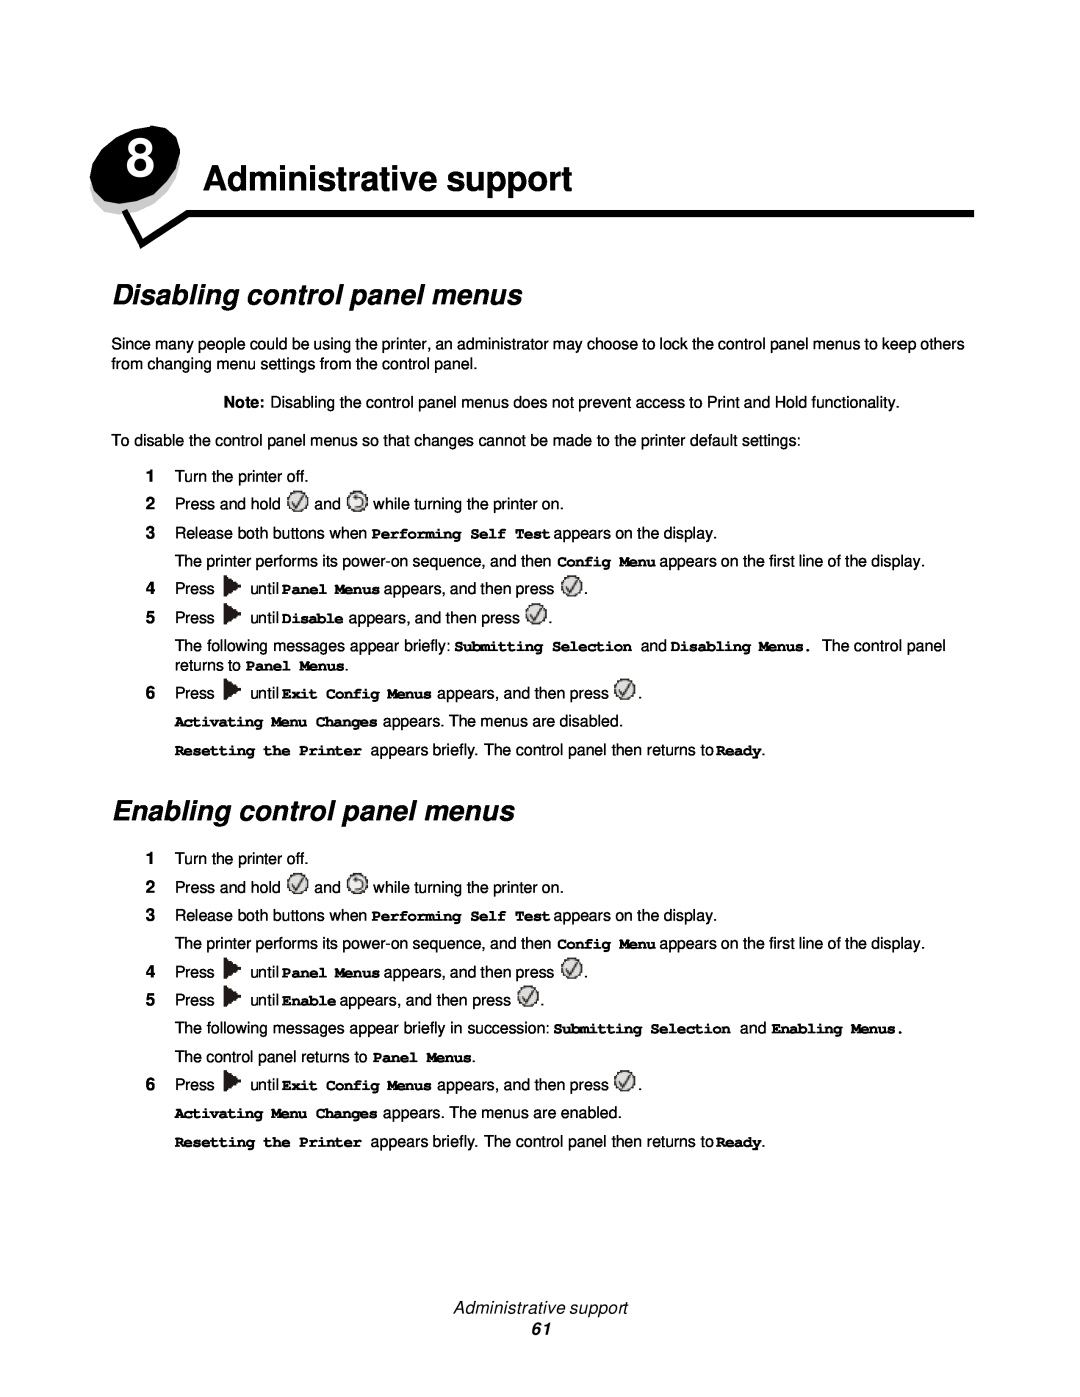 Lexmark 350d manual Administrative support, Disabling control panel menus, Enabling control panel menus 